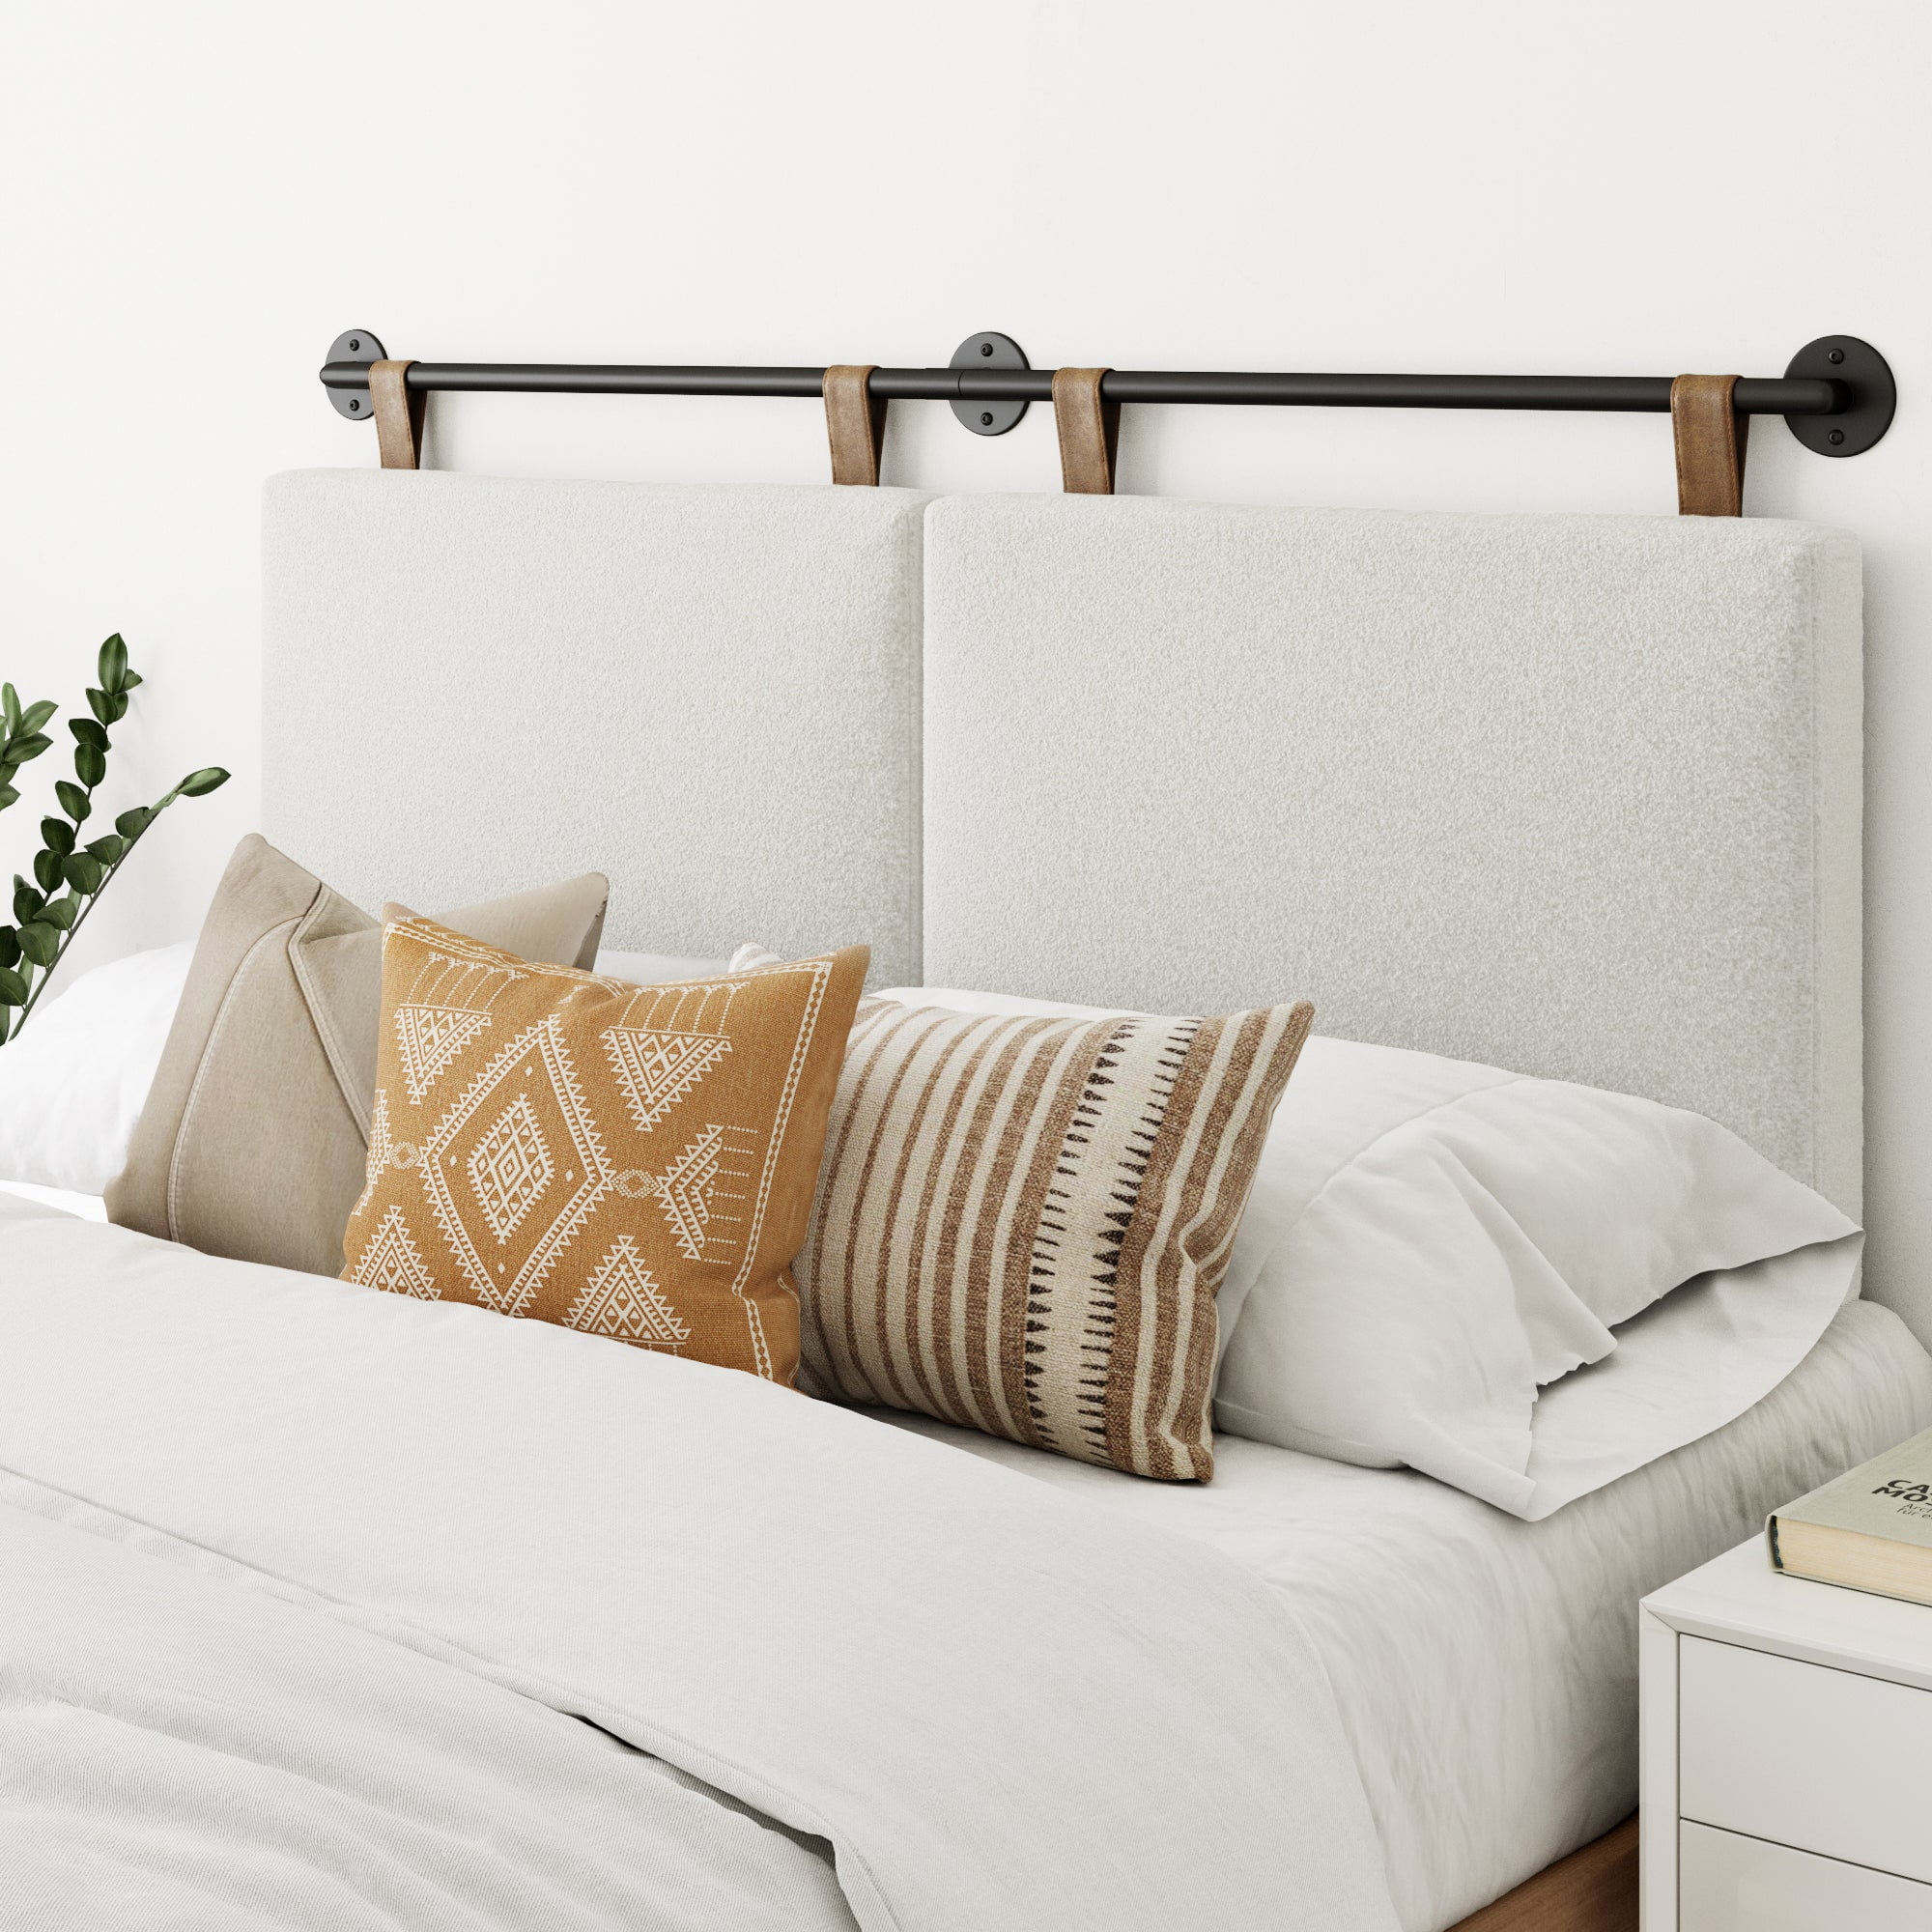 Tan Leather Hanging Headboard with Straps - Queen